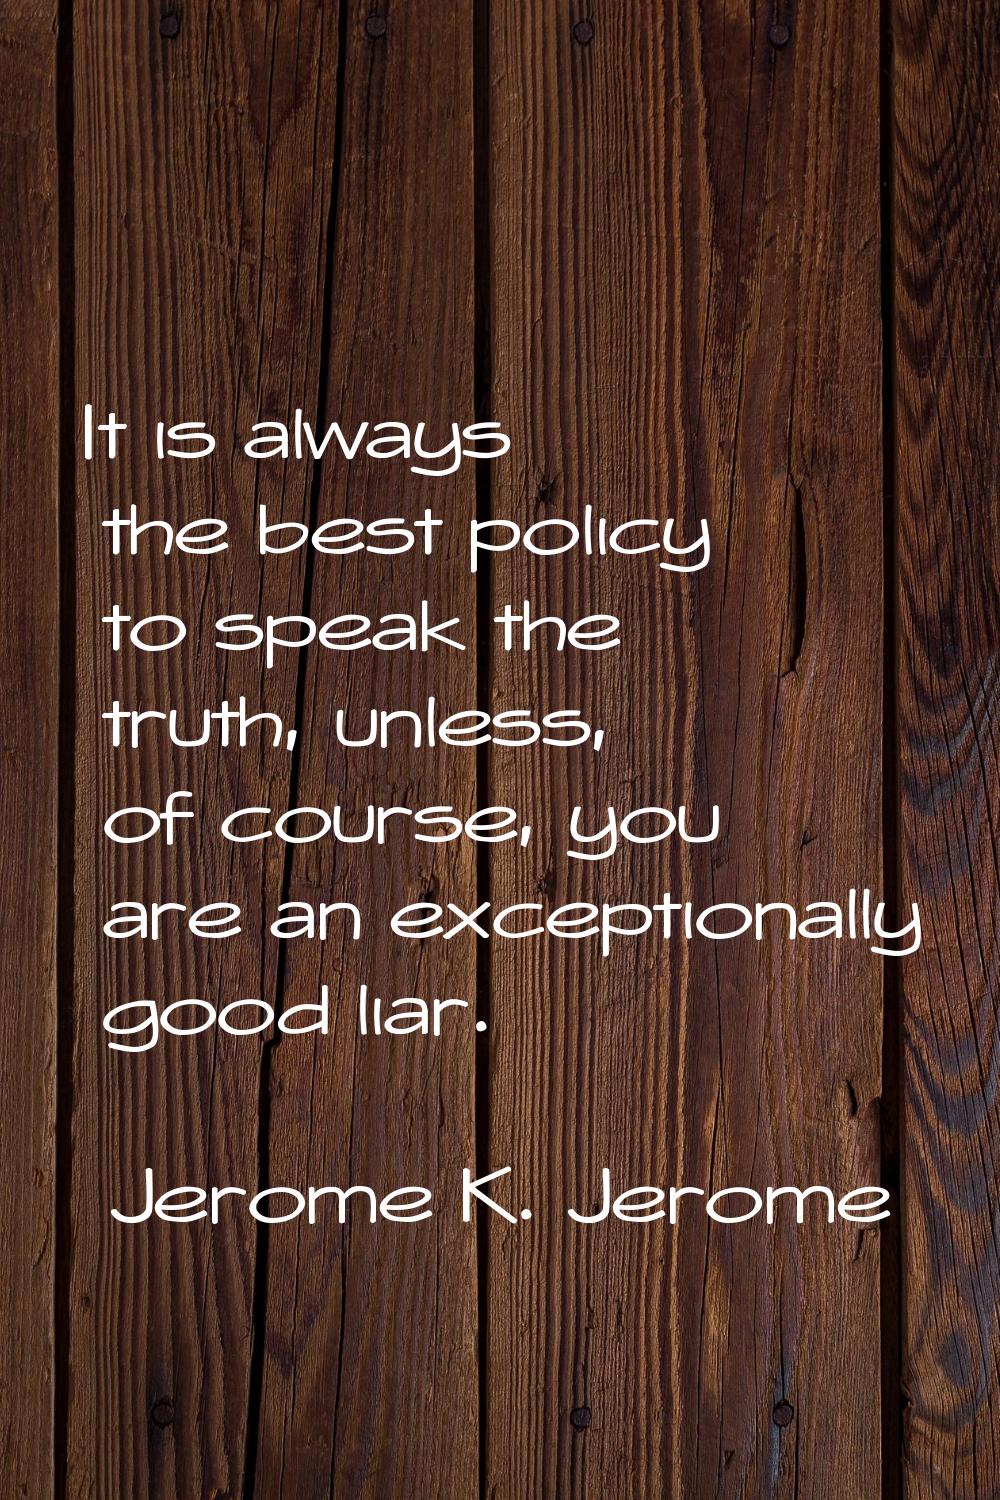 It is always the best policy to speak the truth, unless, of course, you are an exceptionally good l